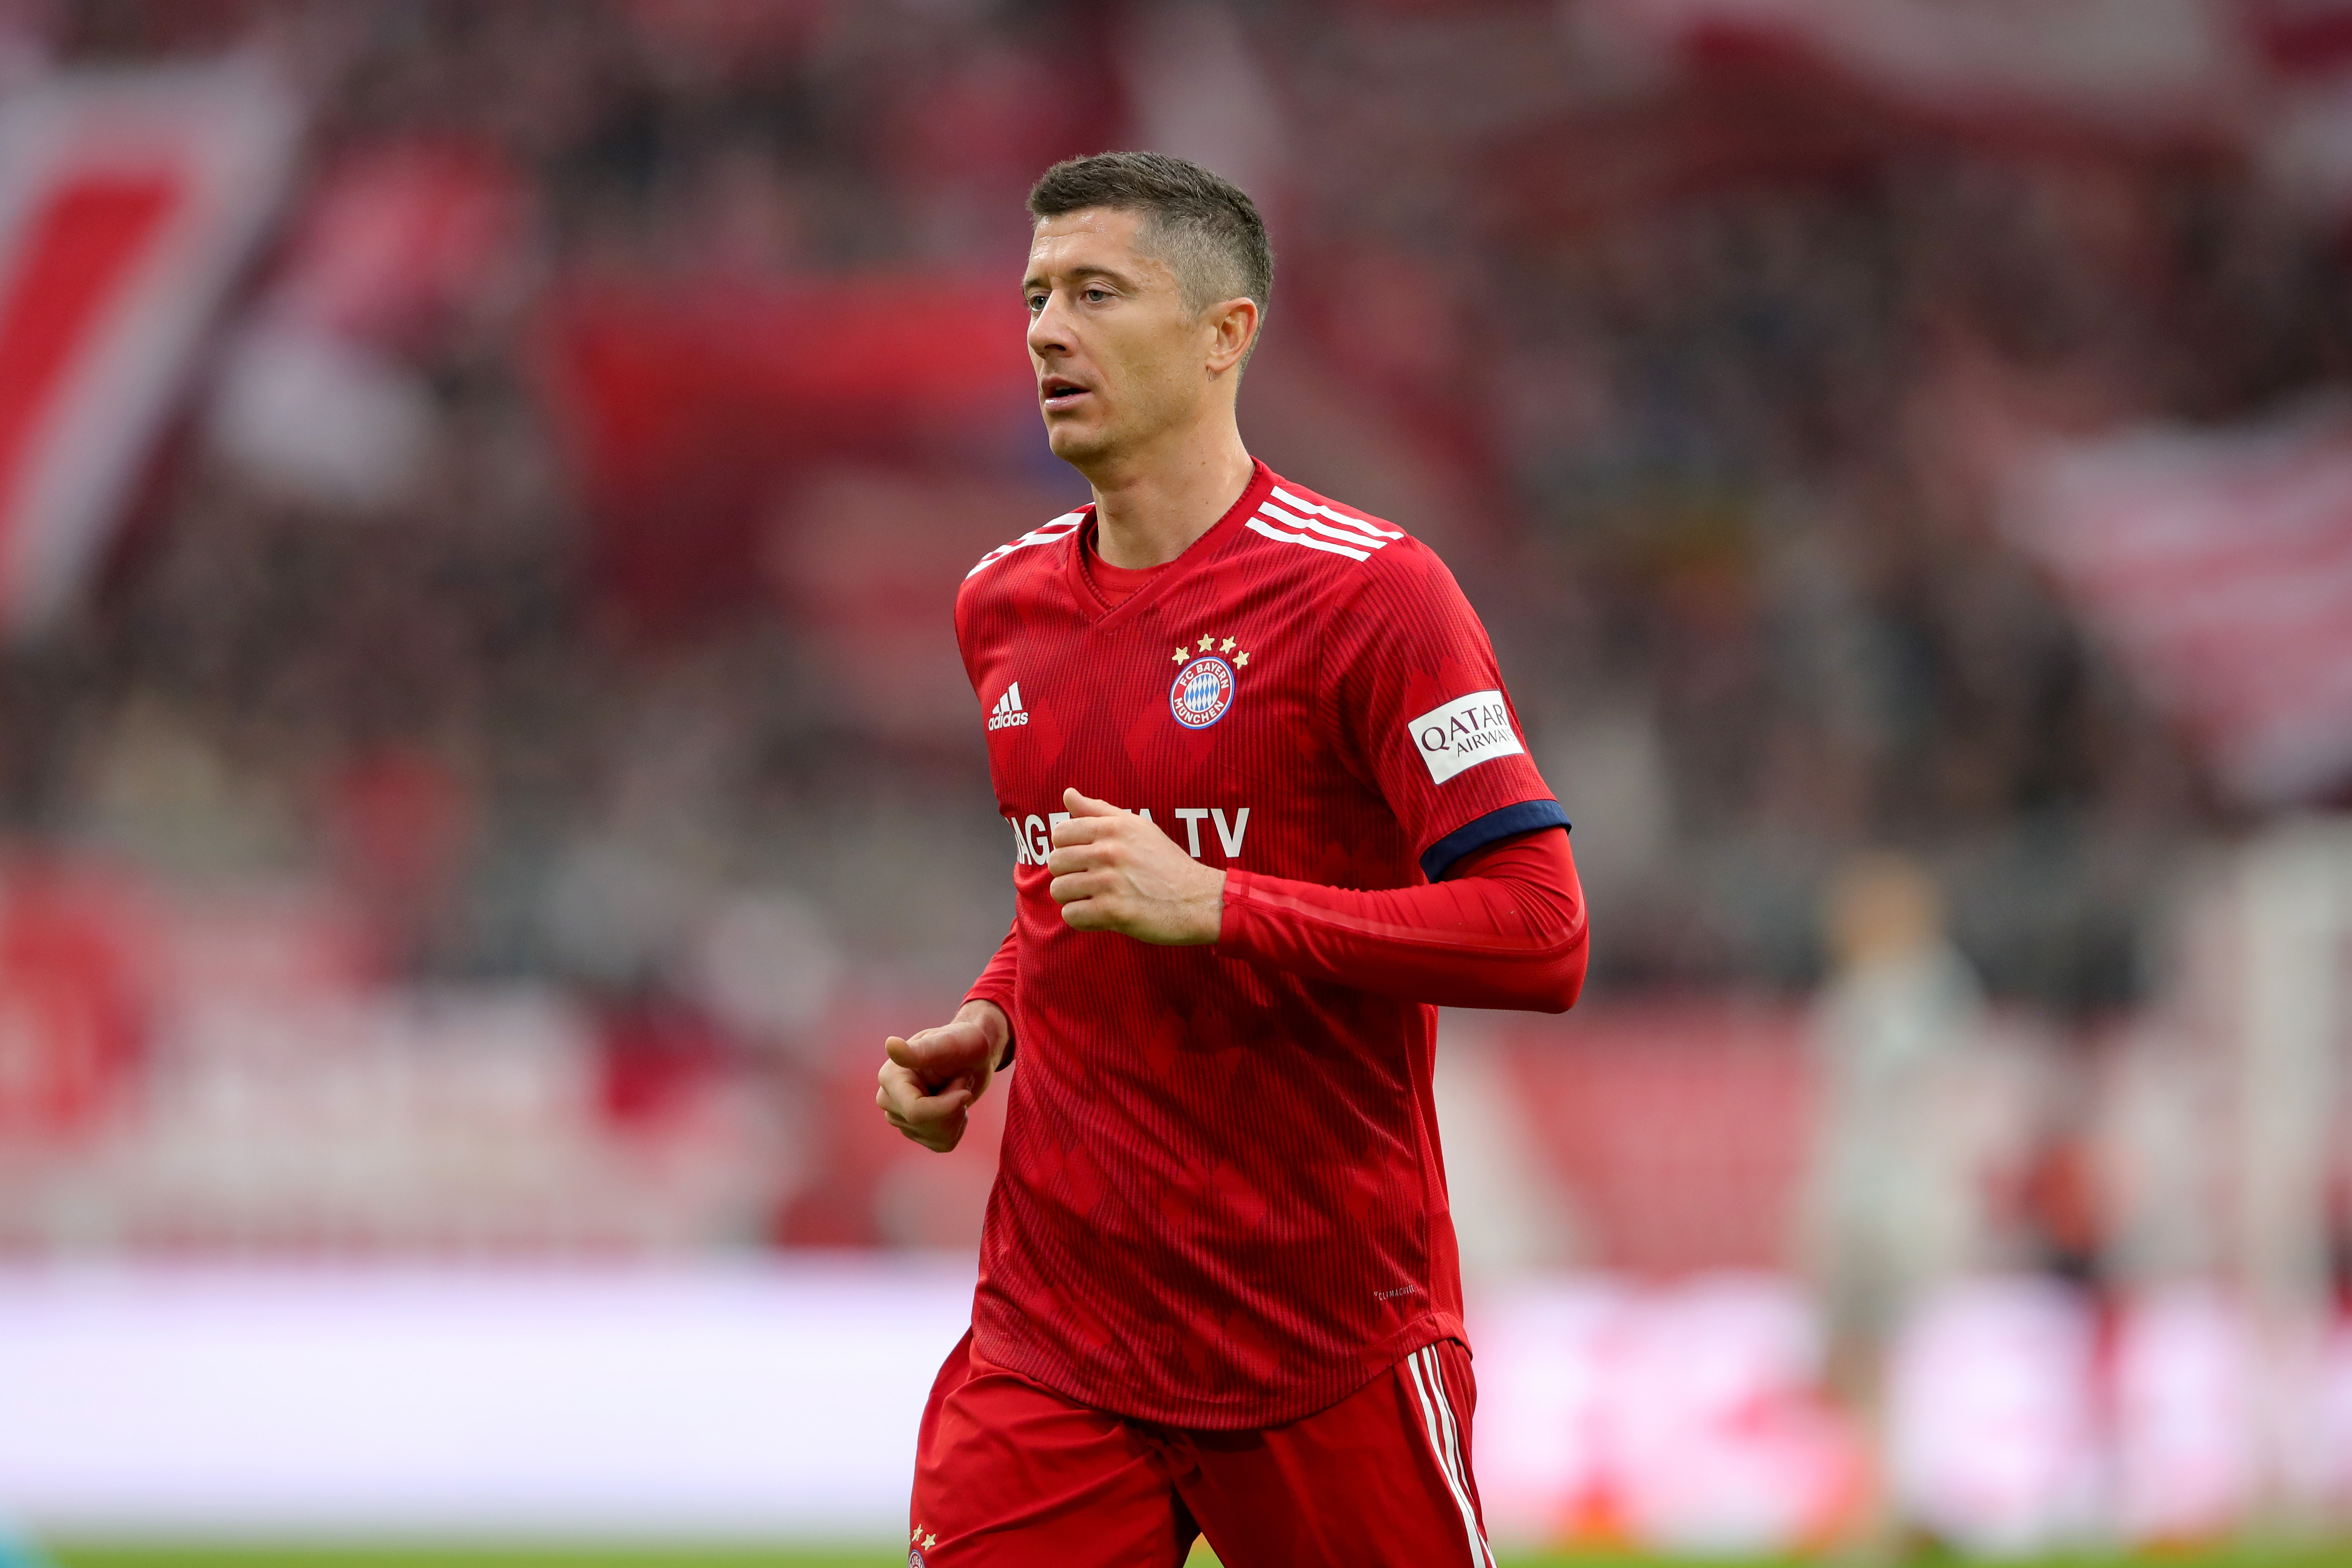 Another frustrating game for Robert Lewandowski. (Photo by Alexander Hassenstein/Bongarts/Getty Images)